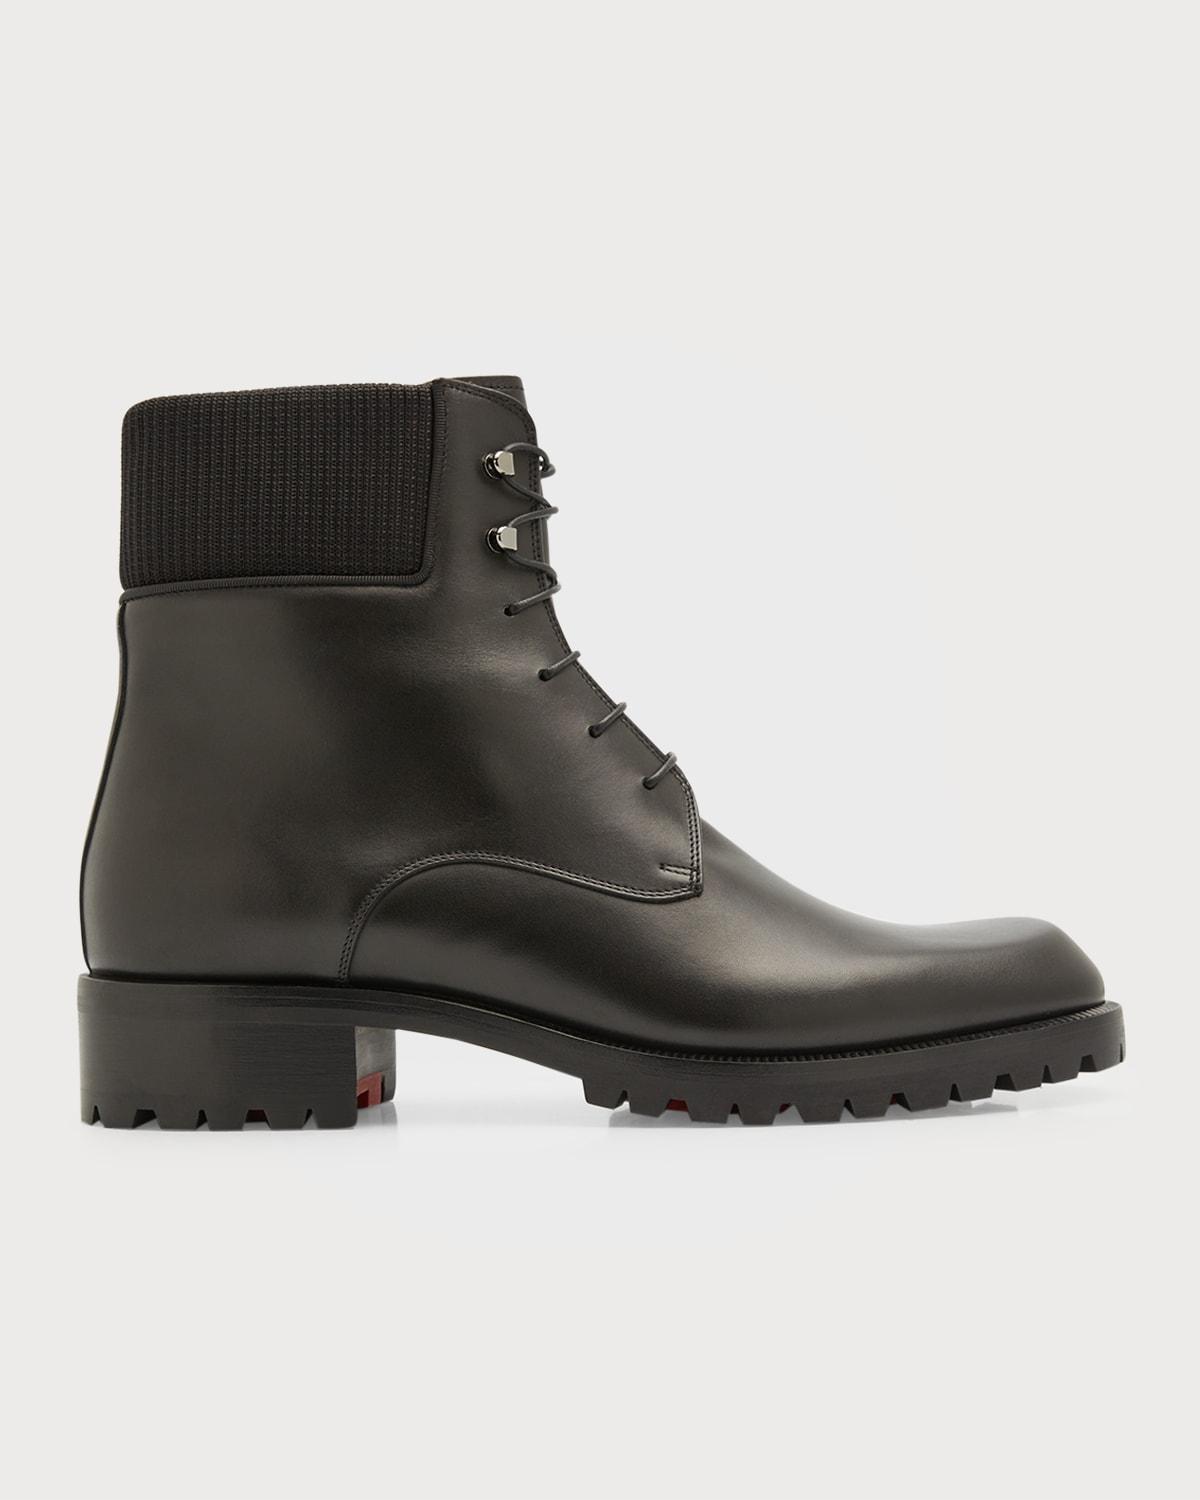 Christian Louboutin Trapman Red Sole Leather Combat Boots in Black for Men